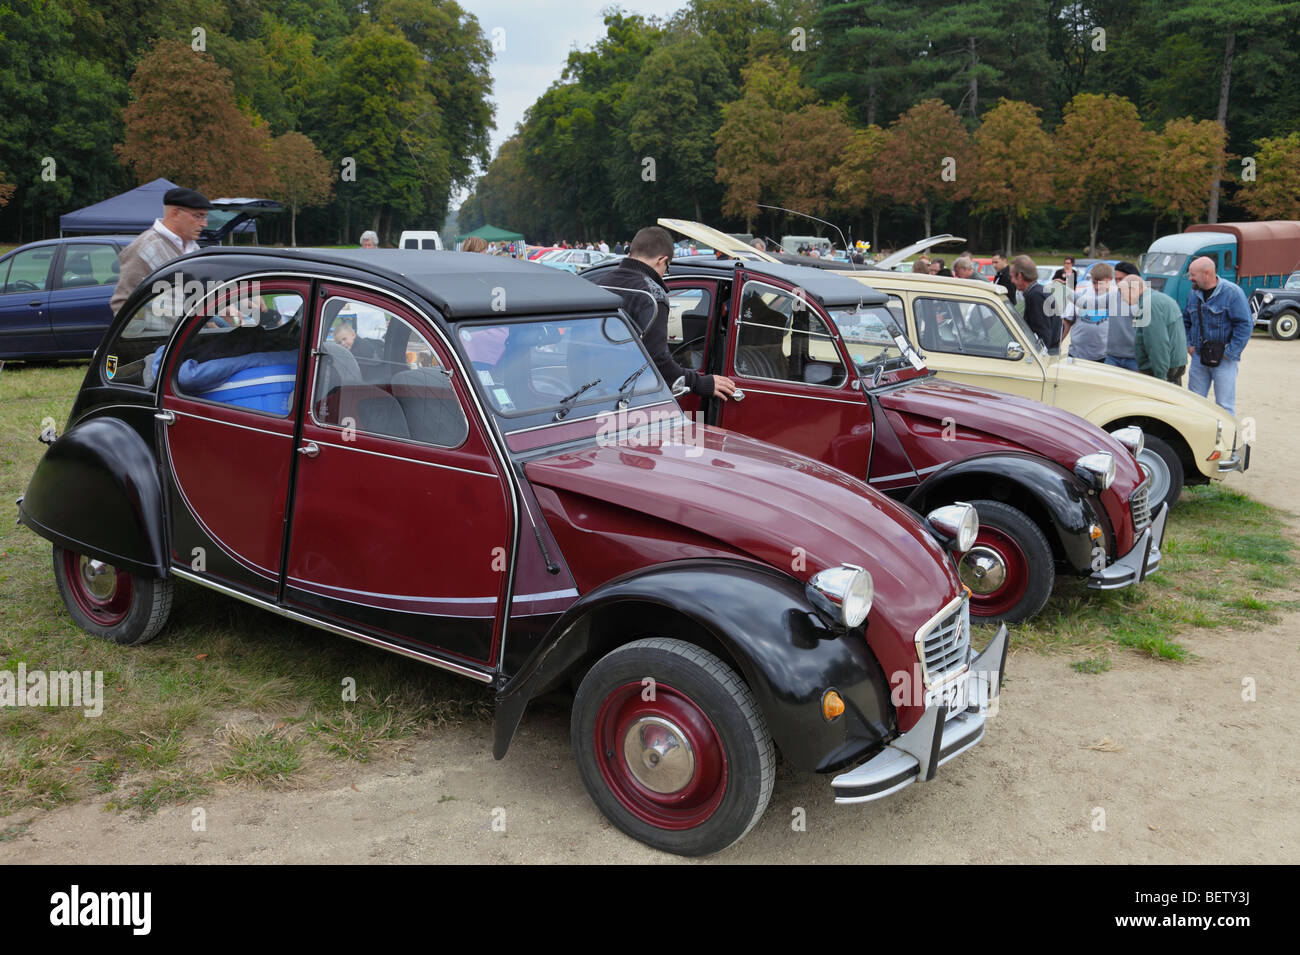 Place du Temple-Neuf in central Strasbourg vintage Citroen car driving  between cars – Stock Editorial Photo © ifeelstock #551629444